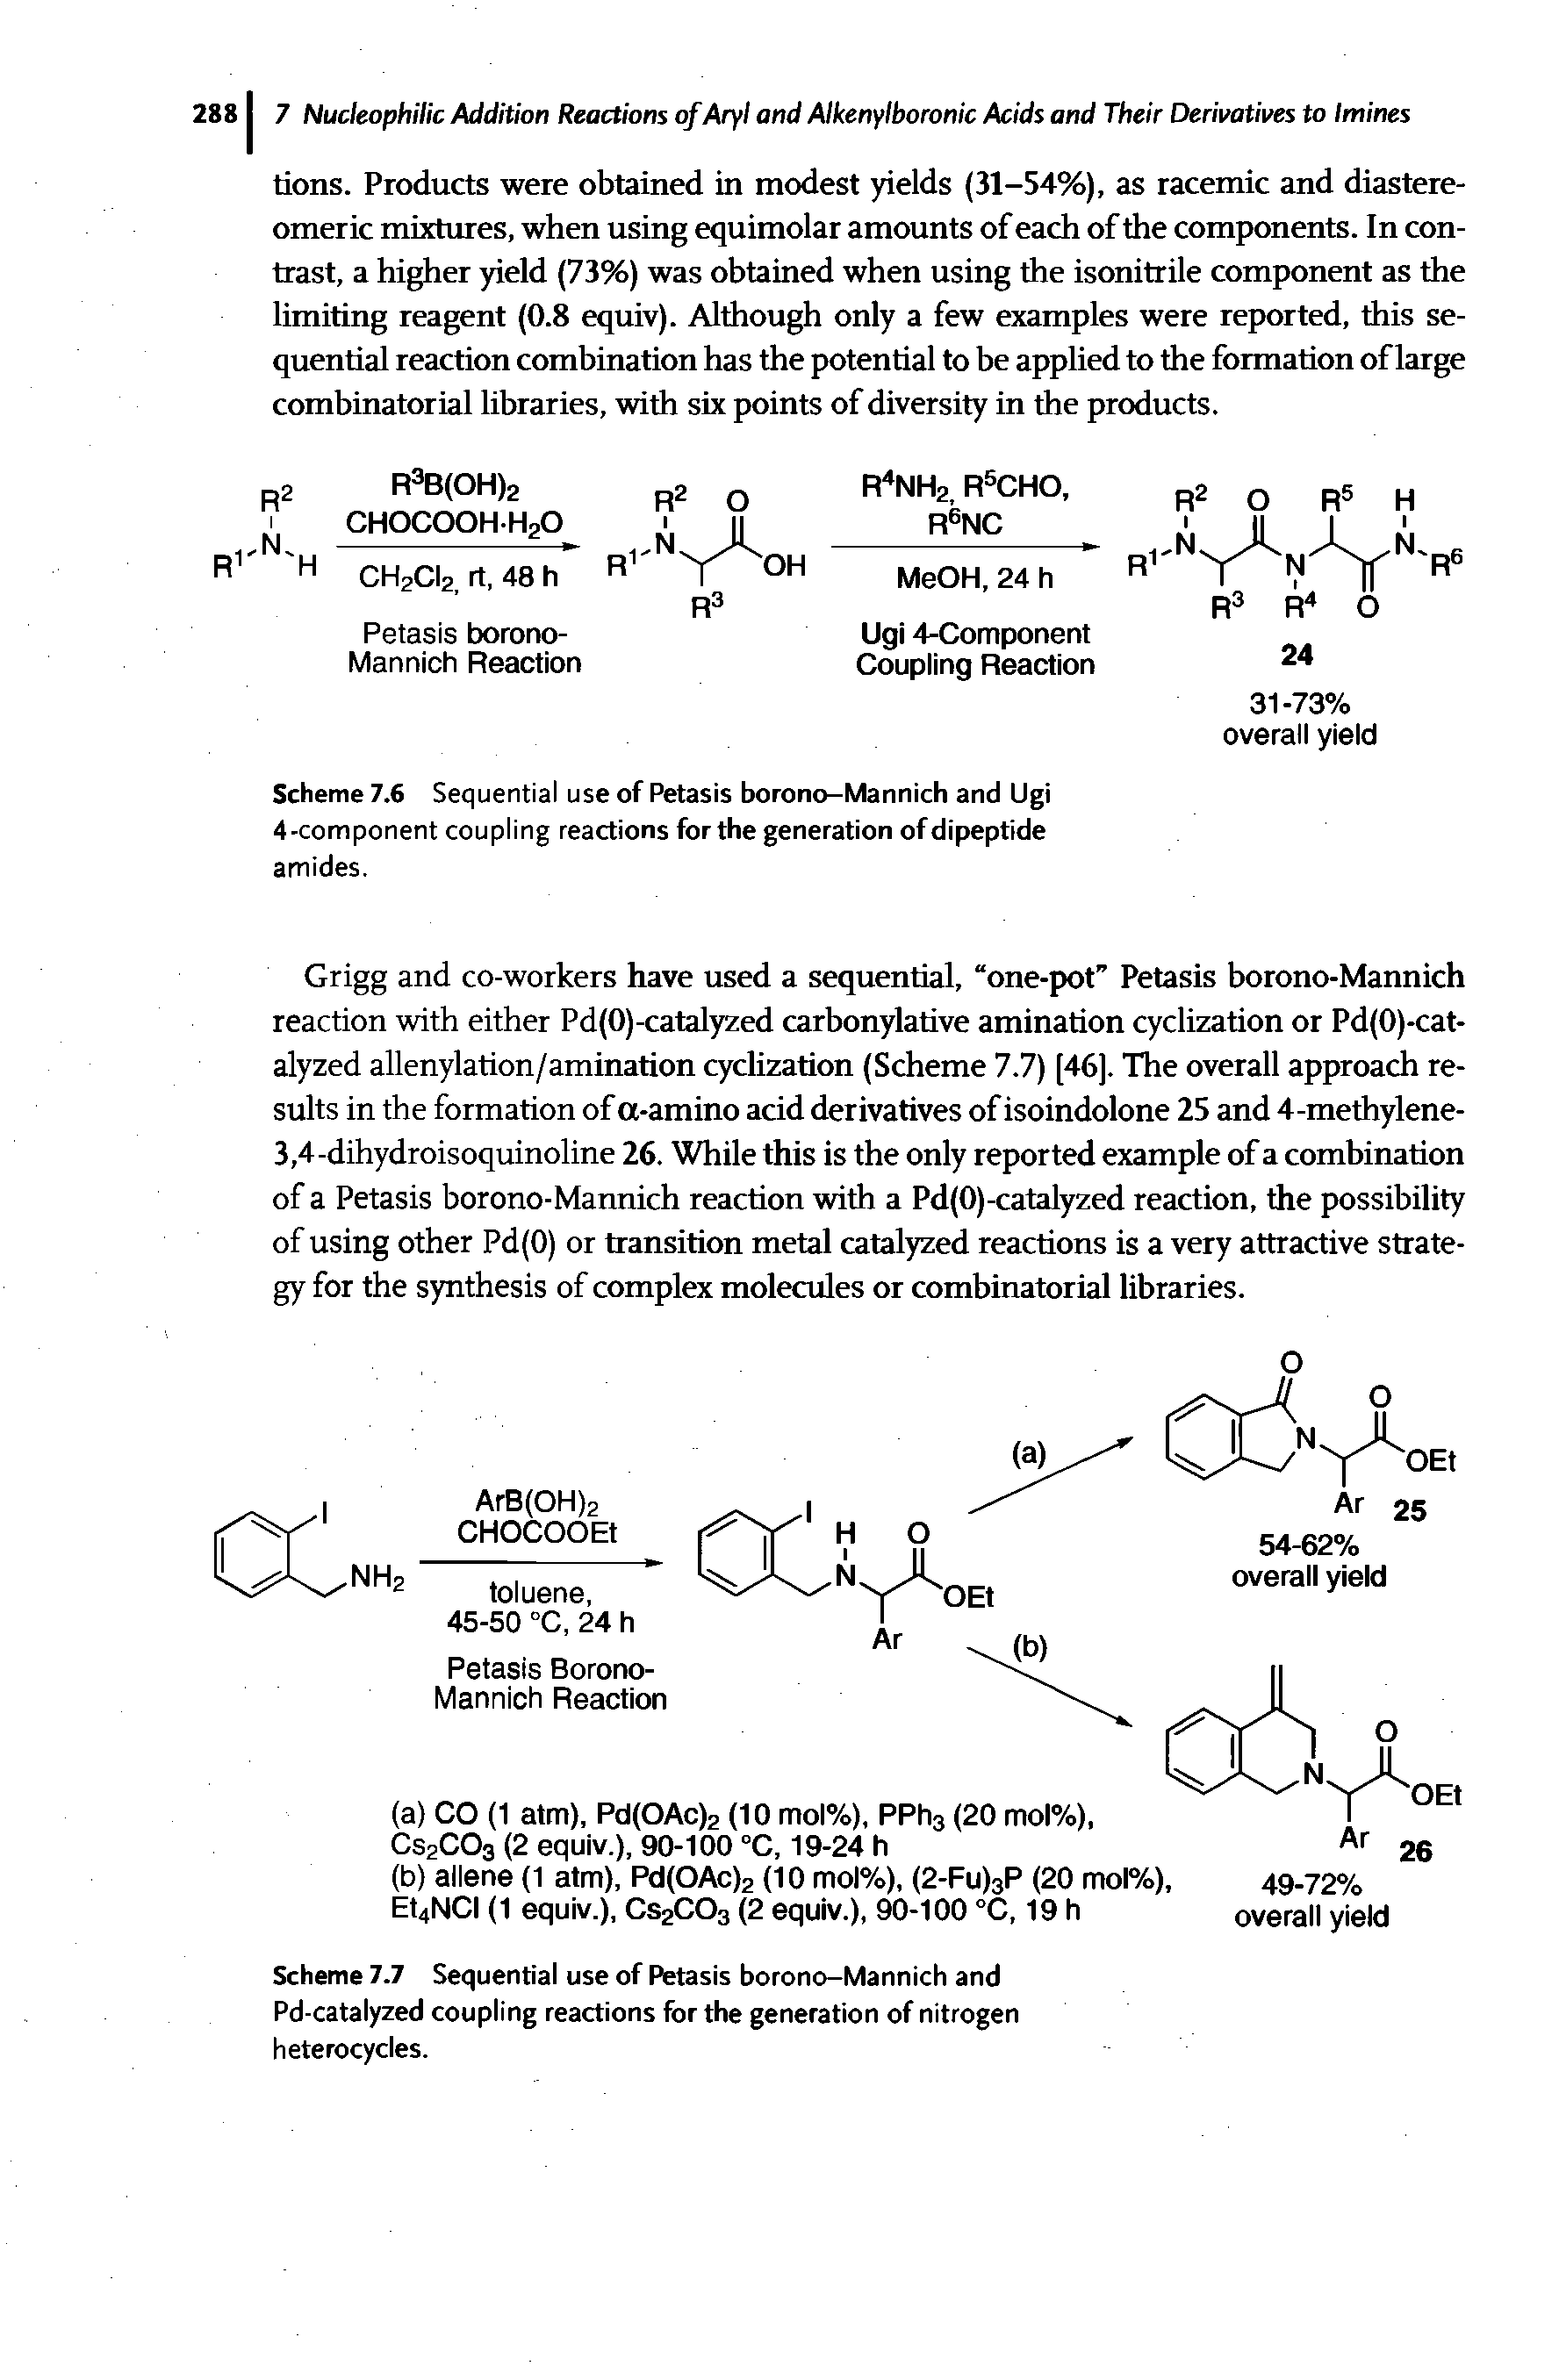 Scheme 7.6 Sequential use of Petasis borono-Mannich and Ugi 4-component coupling reactions for the generation of dipeptide amides.